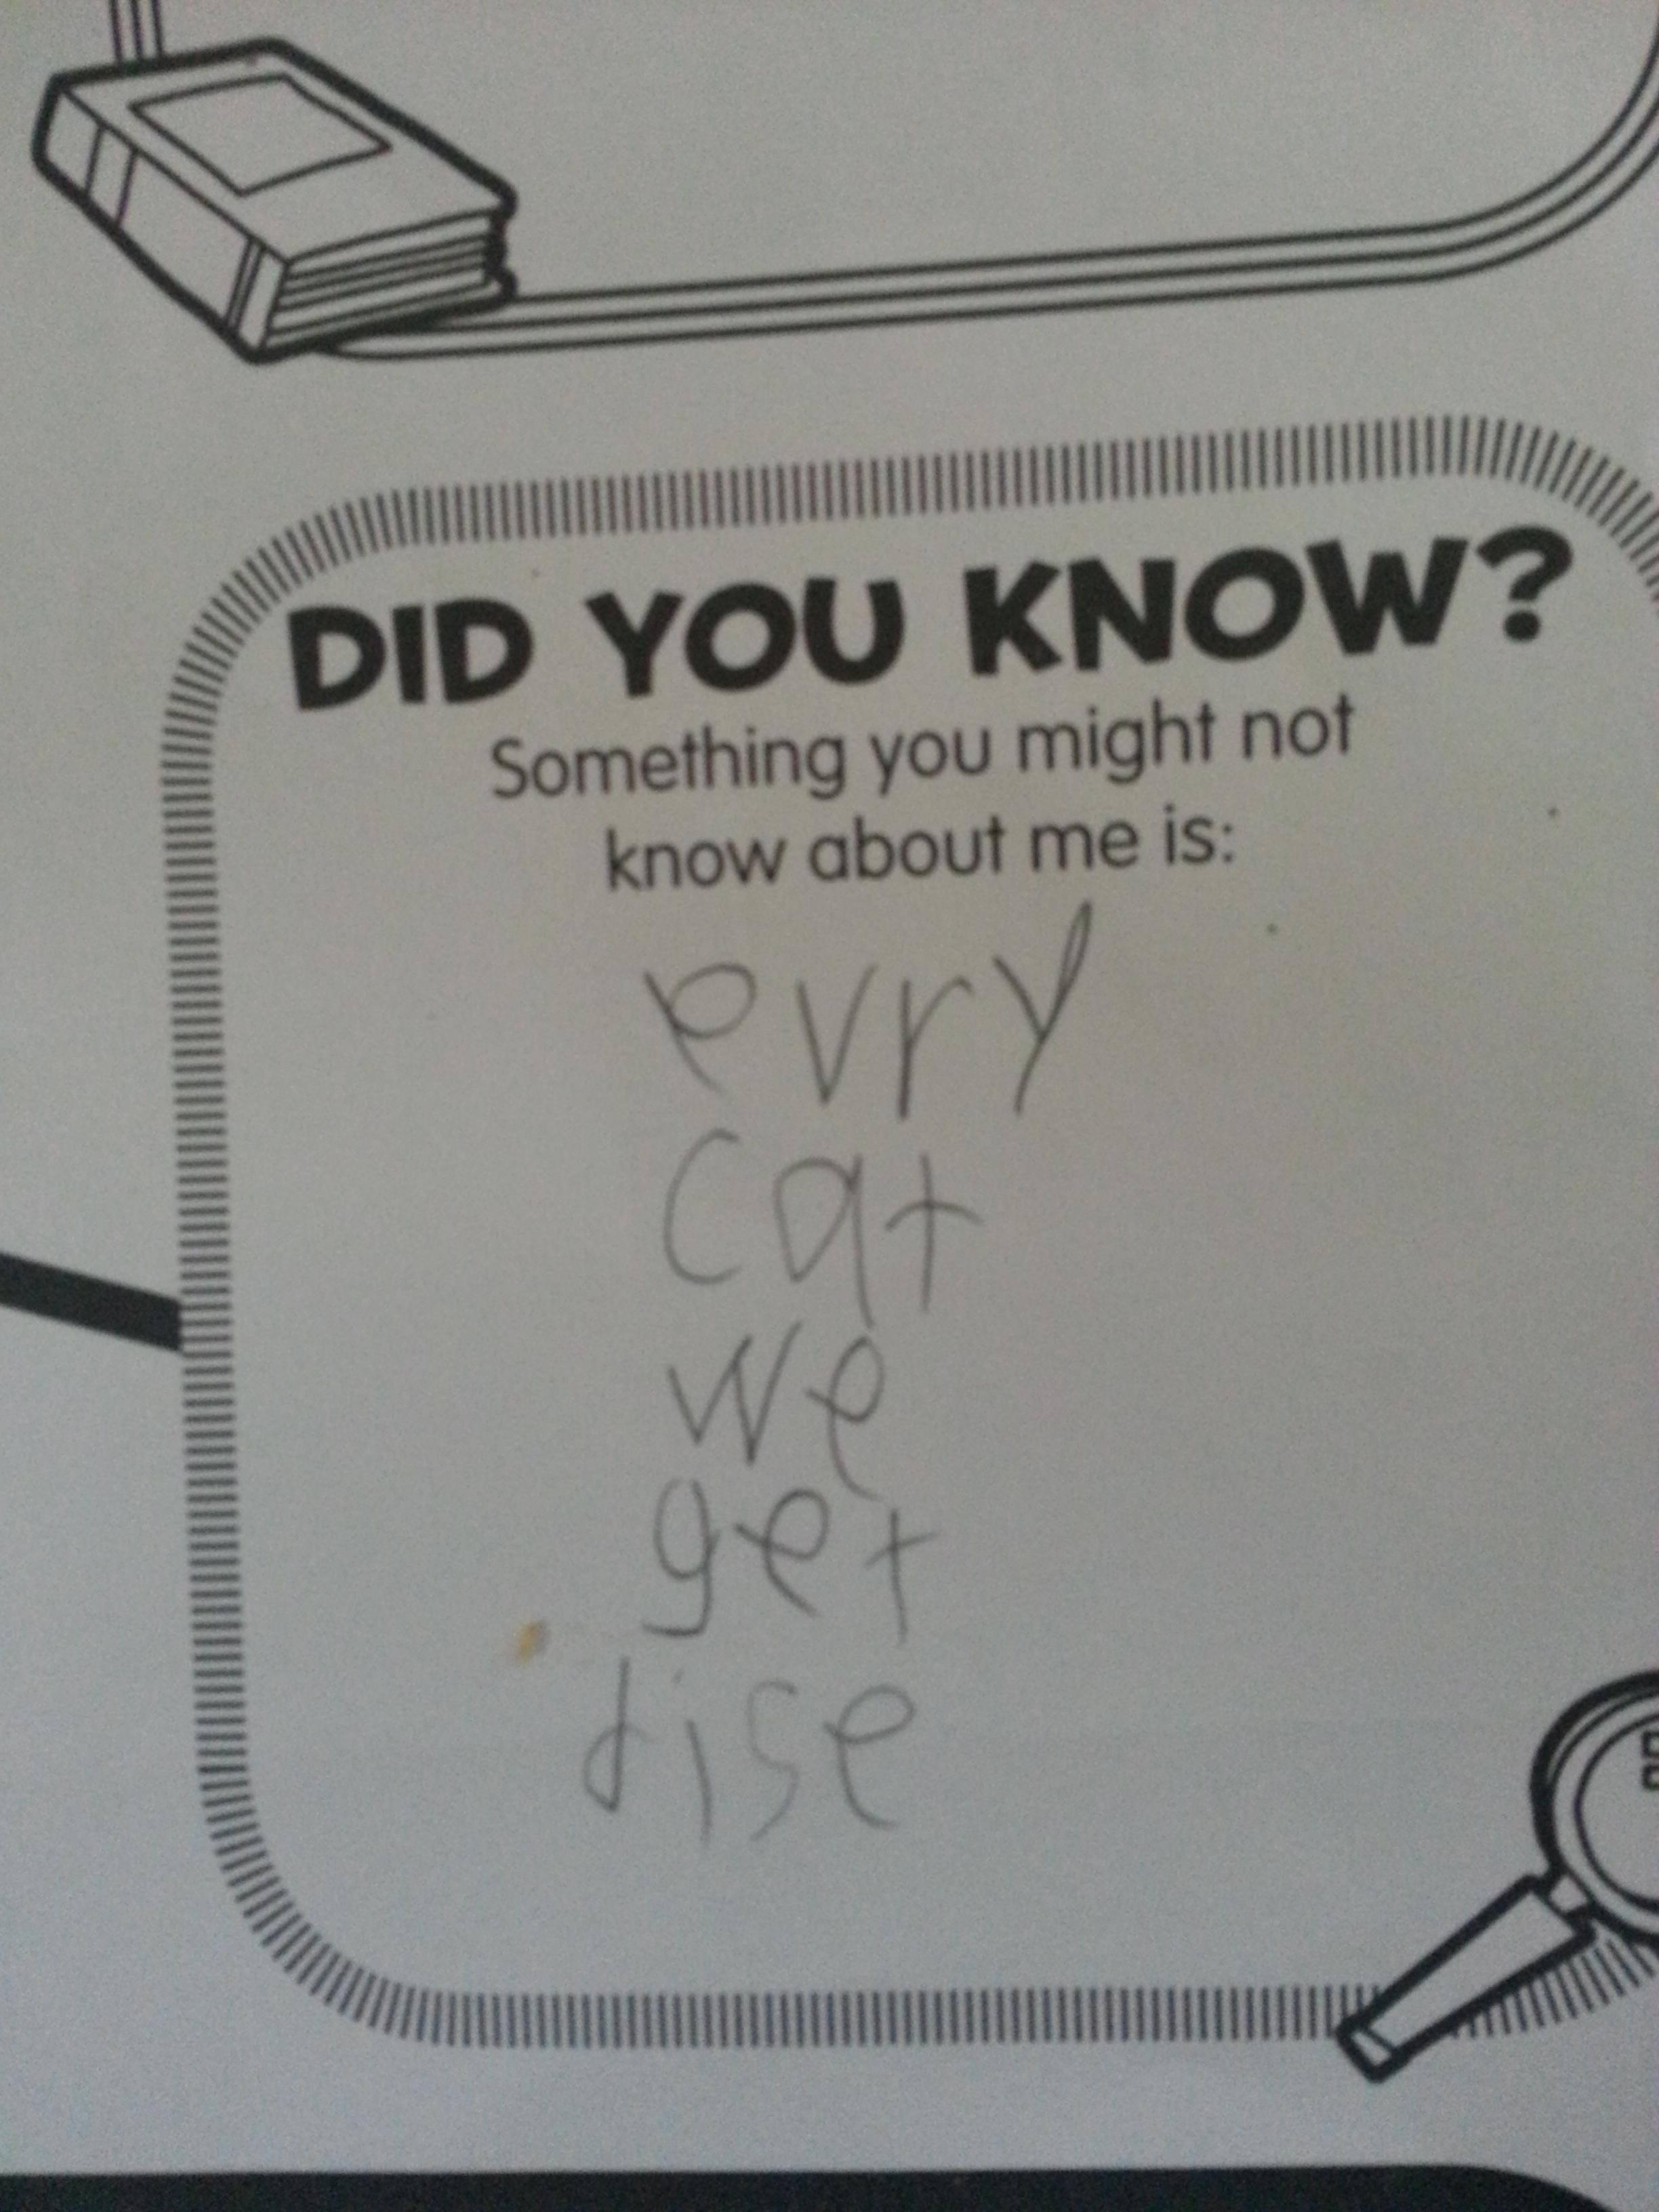 Child - Did You Know? Something you might not know about me is evry cat get dise